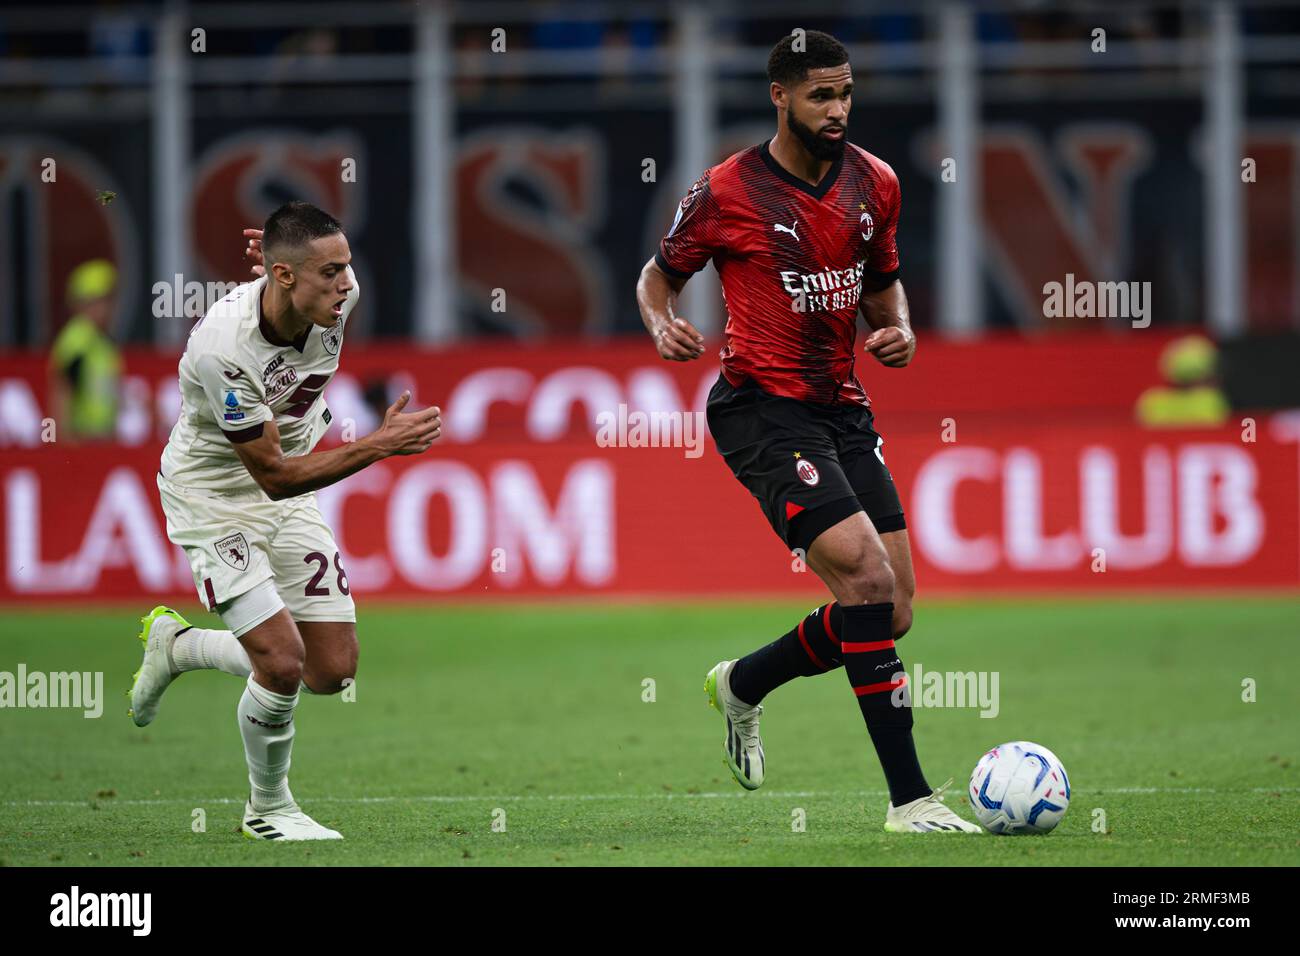 Ruben Loftus-Cheek of AC Milan in action during the Serie A football match between AC Milan and Torino FC. Stock Photo